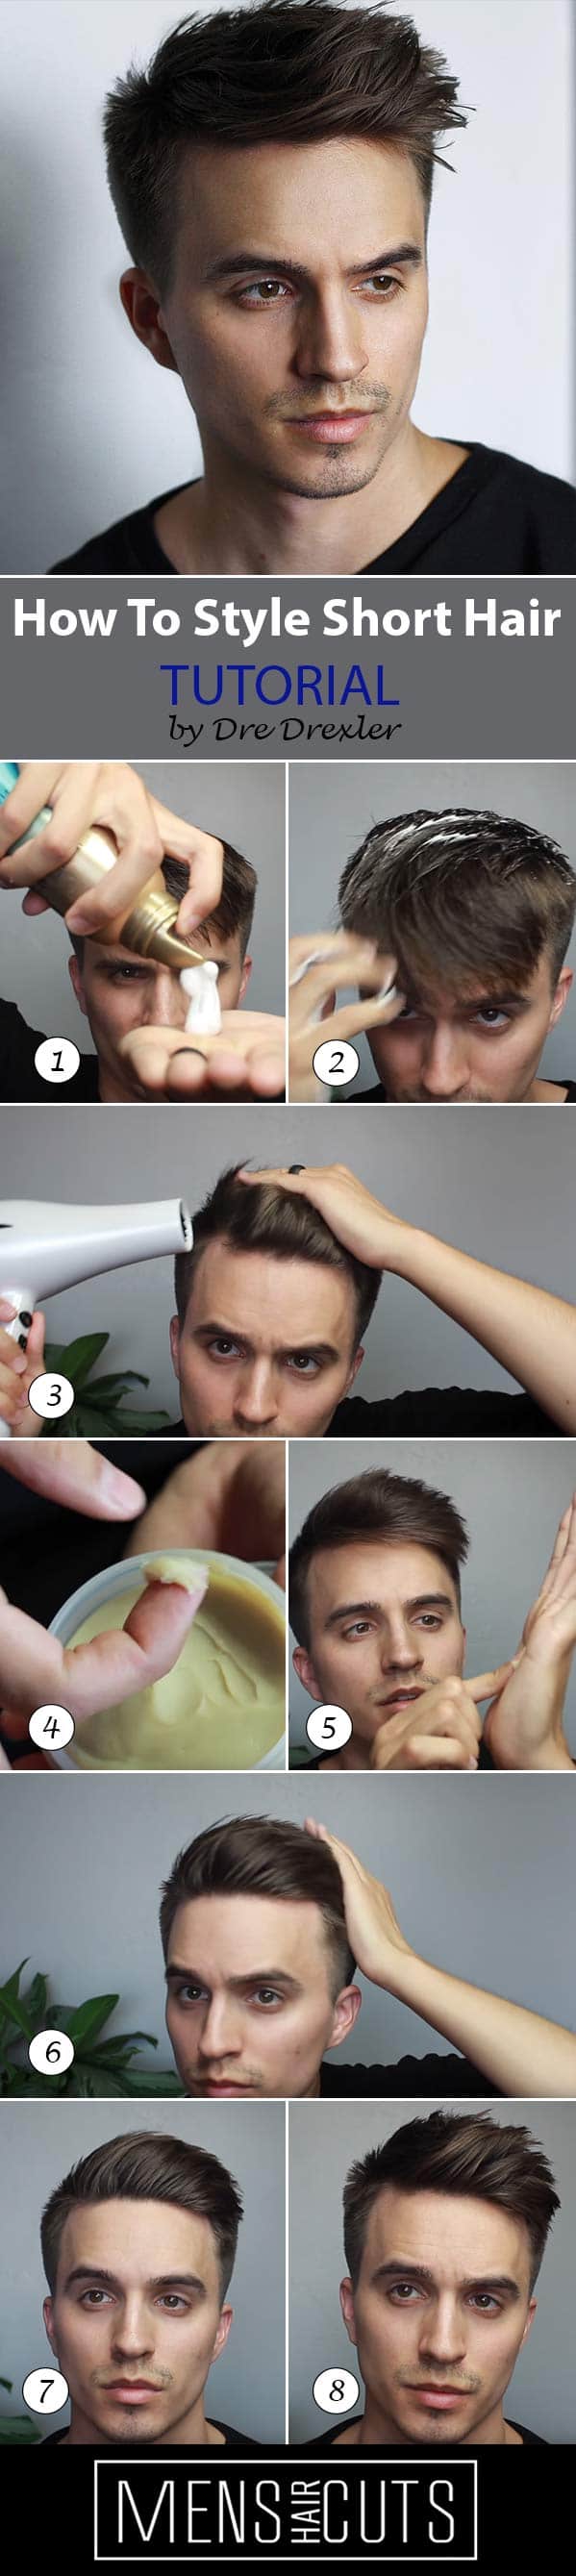 How To Style The Quiff #quiff #tutorial #howtostyleshorthair #shorthair